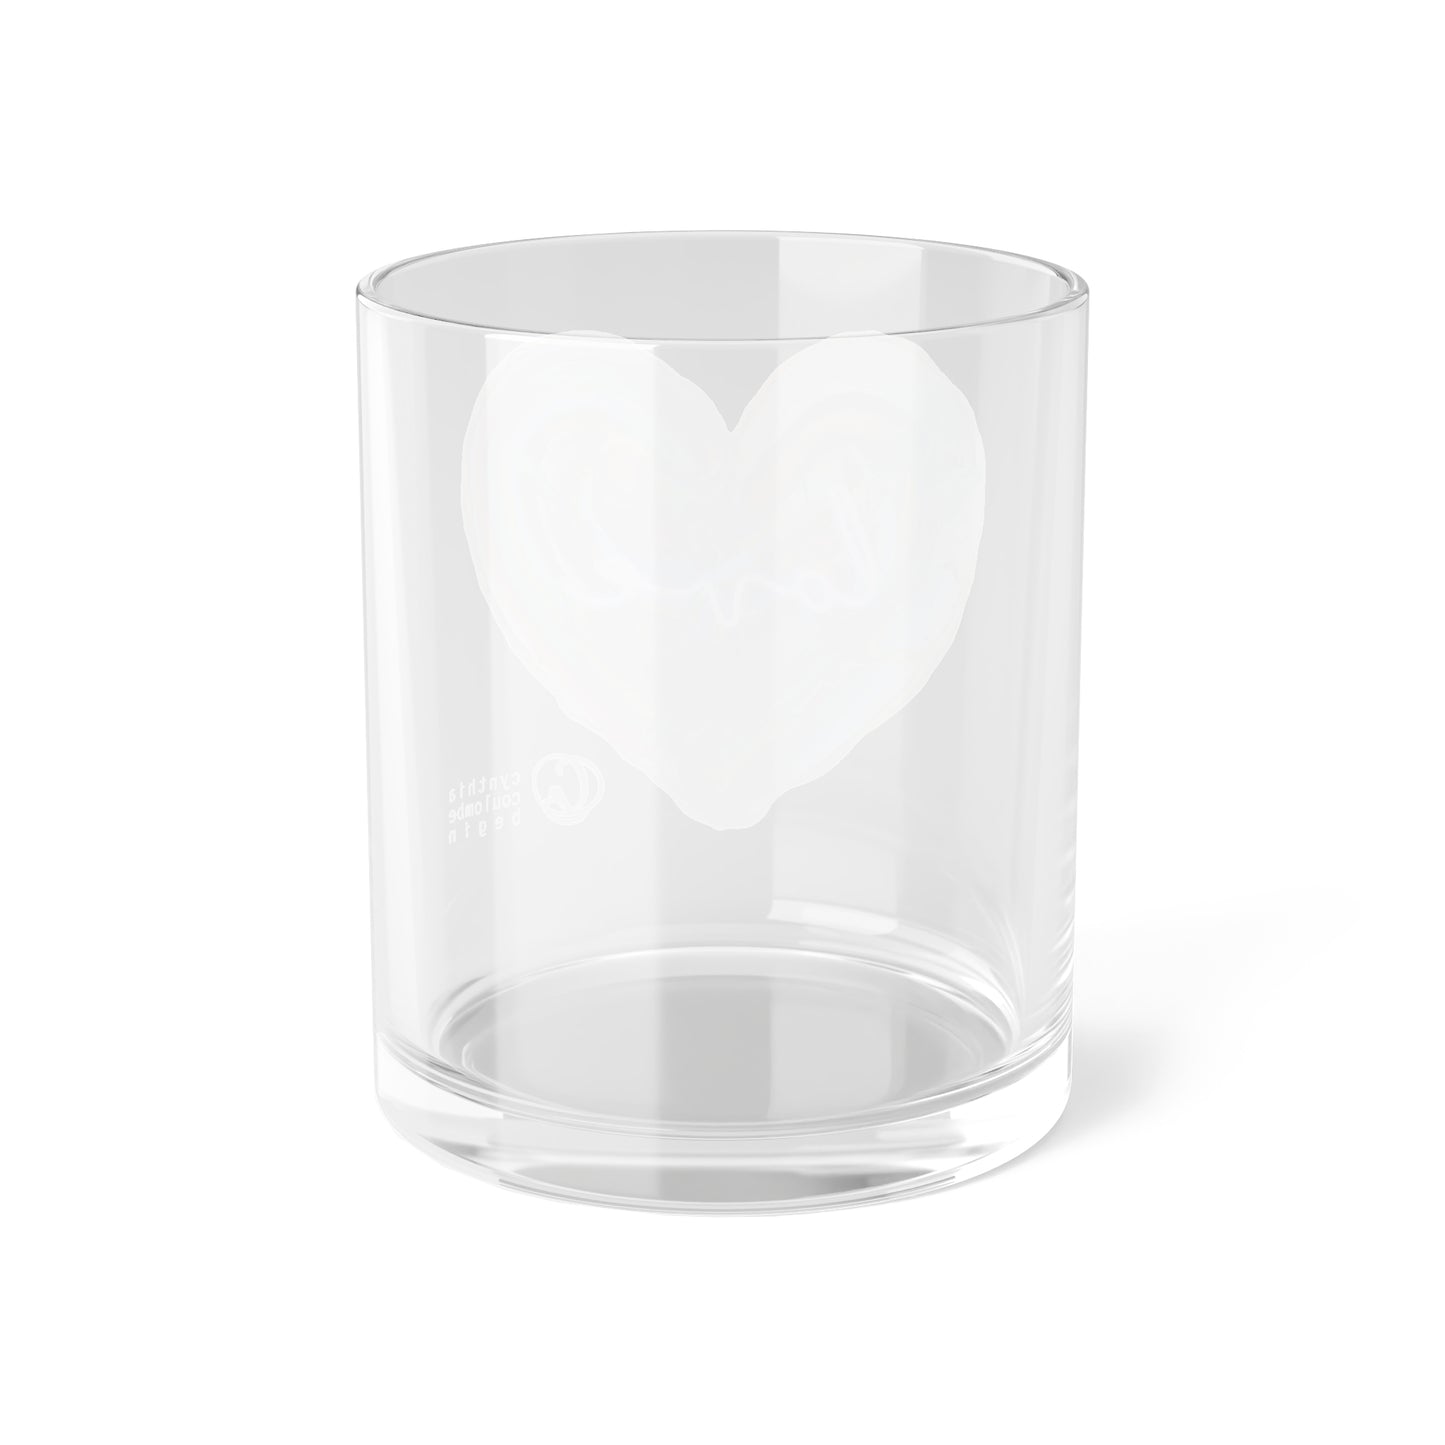 Flying Hearts #1 Glass